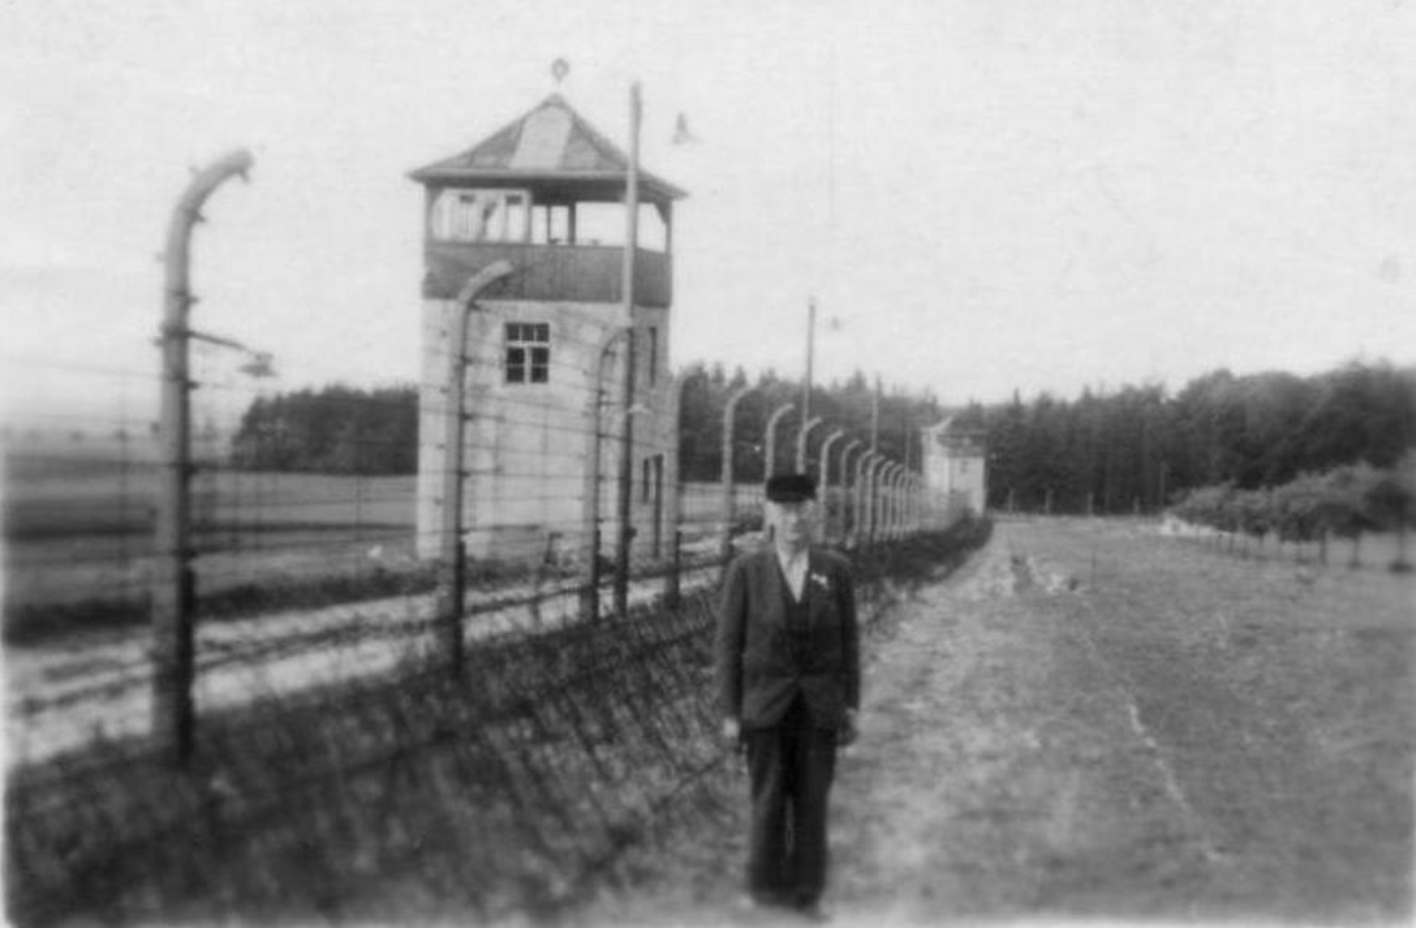 The liberated prisoner Karl Herrmann stands on the inside at the outer camp fence. Behind him the fence, behind it two watchtowers.